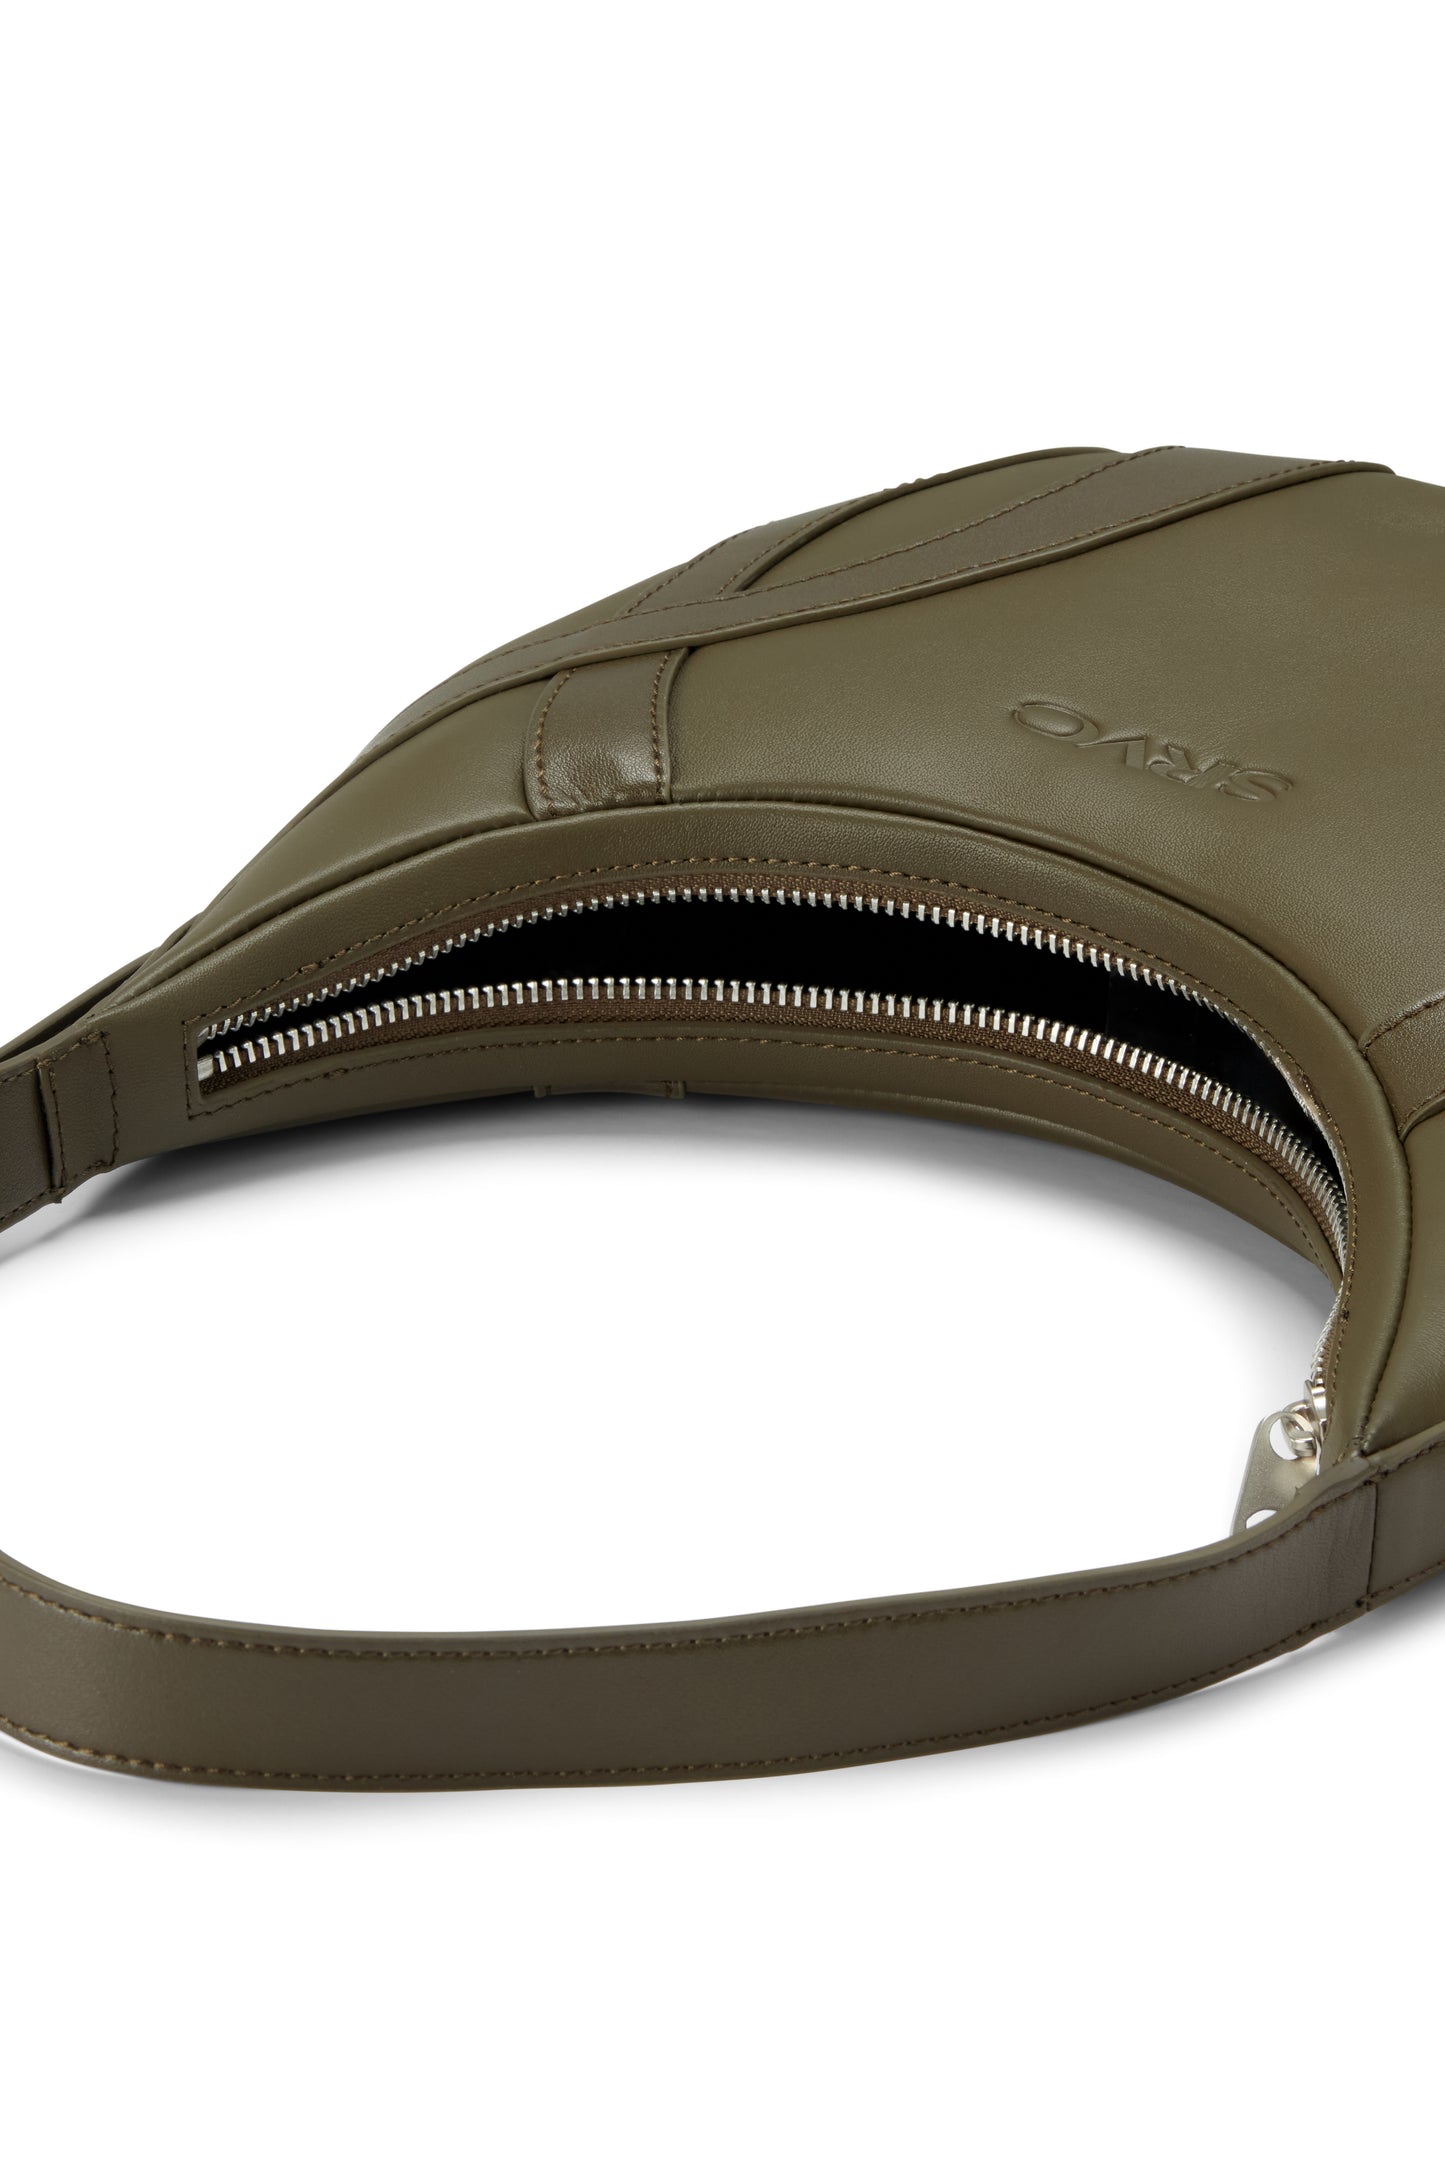 SRVC CABLE BAG OLIVE